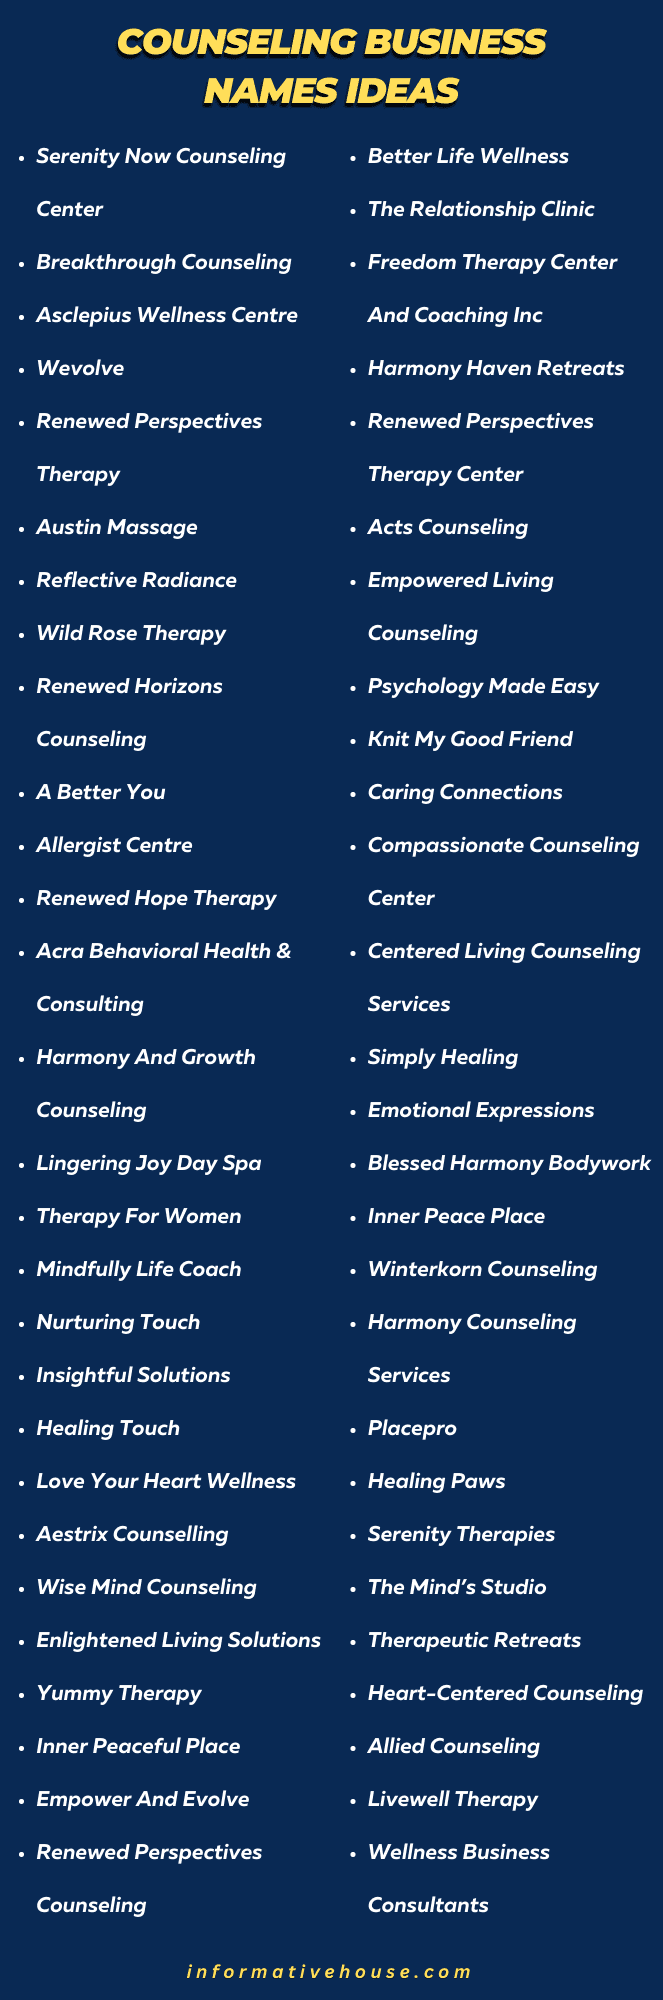 Counseling Business Names